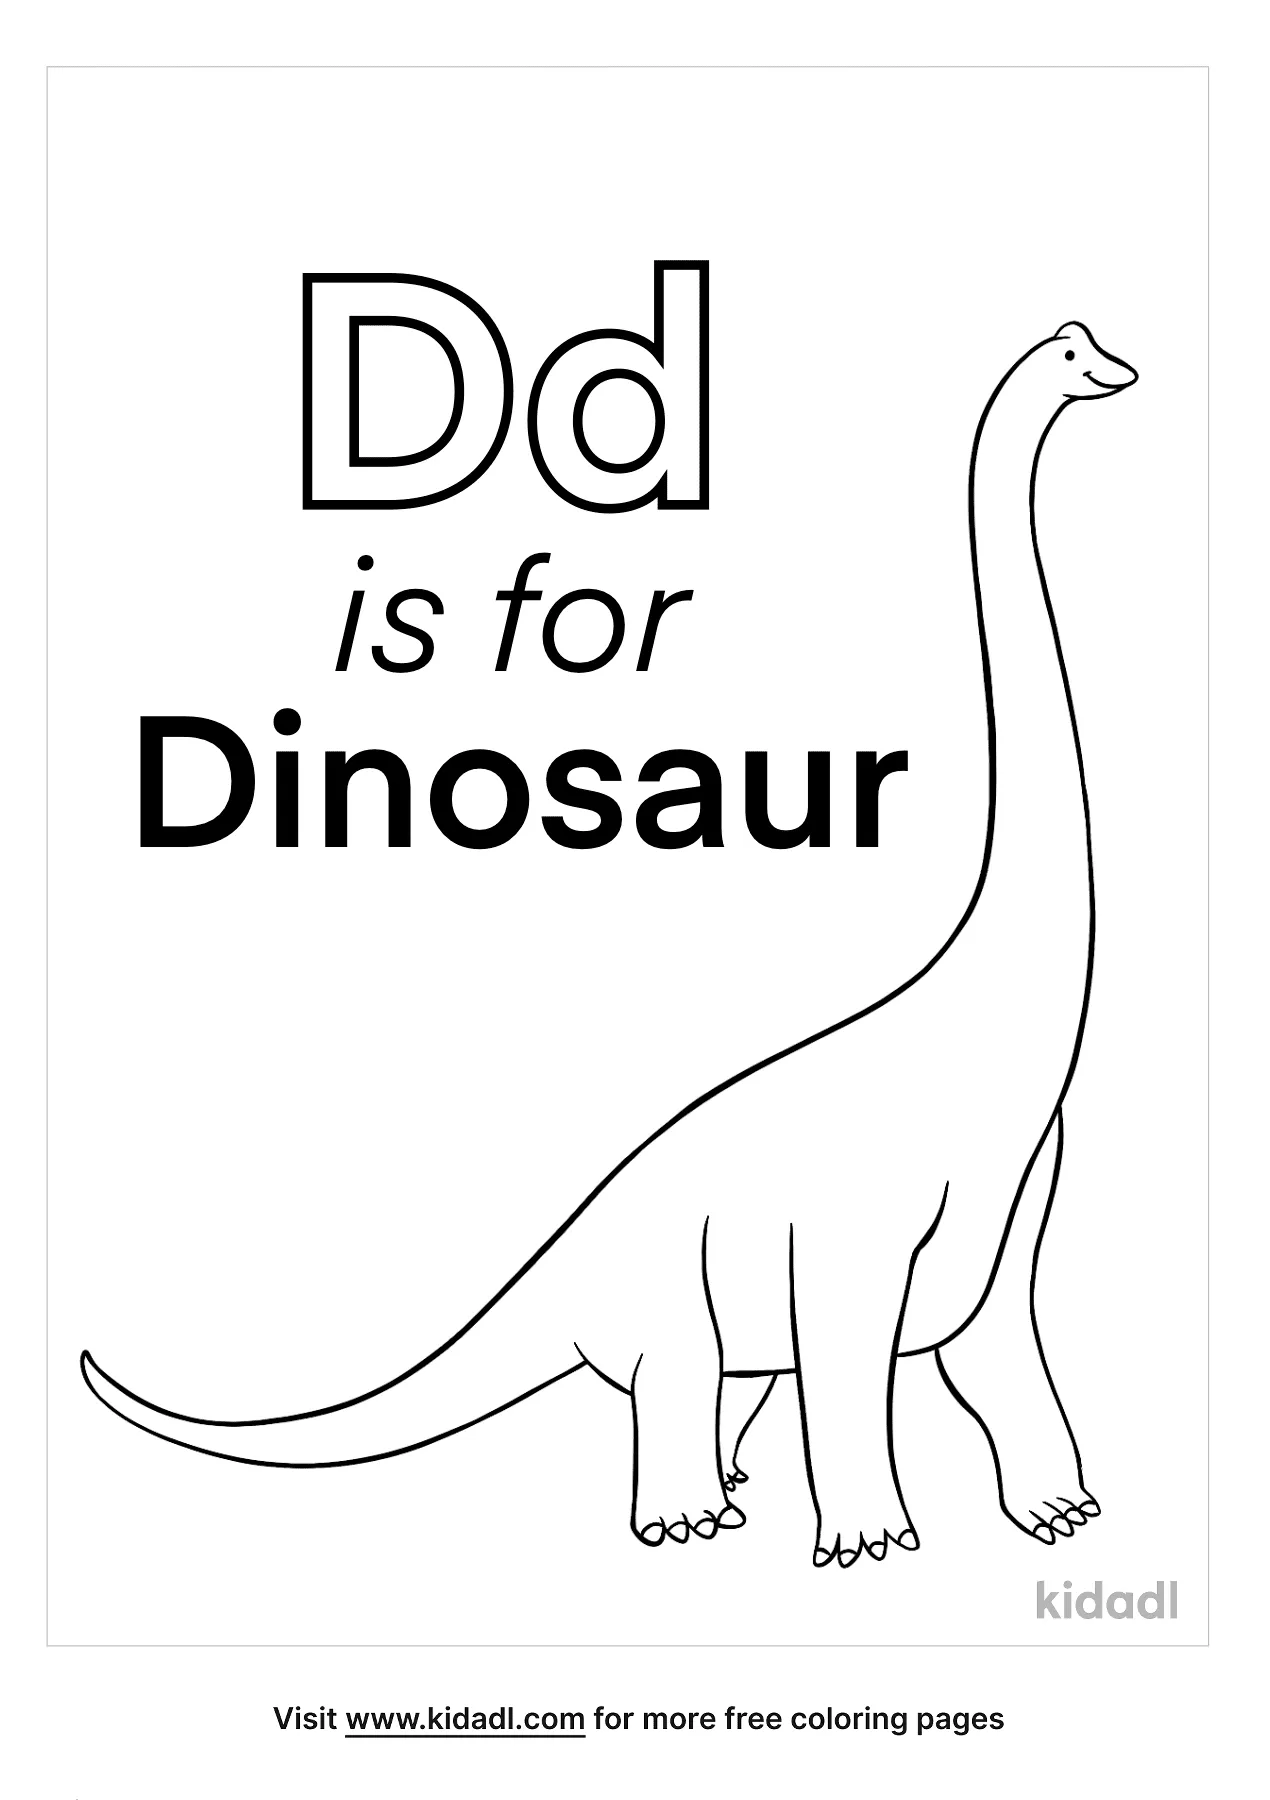 Free D Is For Dinosaur Coloring Page | Coloring Page Printables | Kidadl